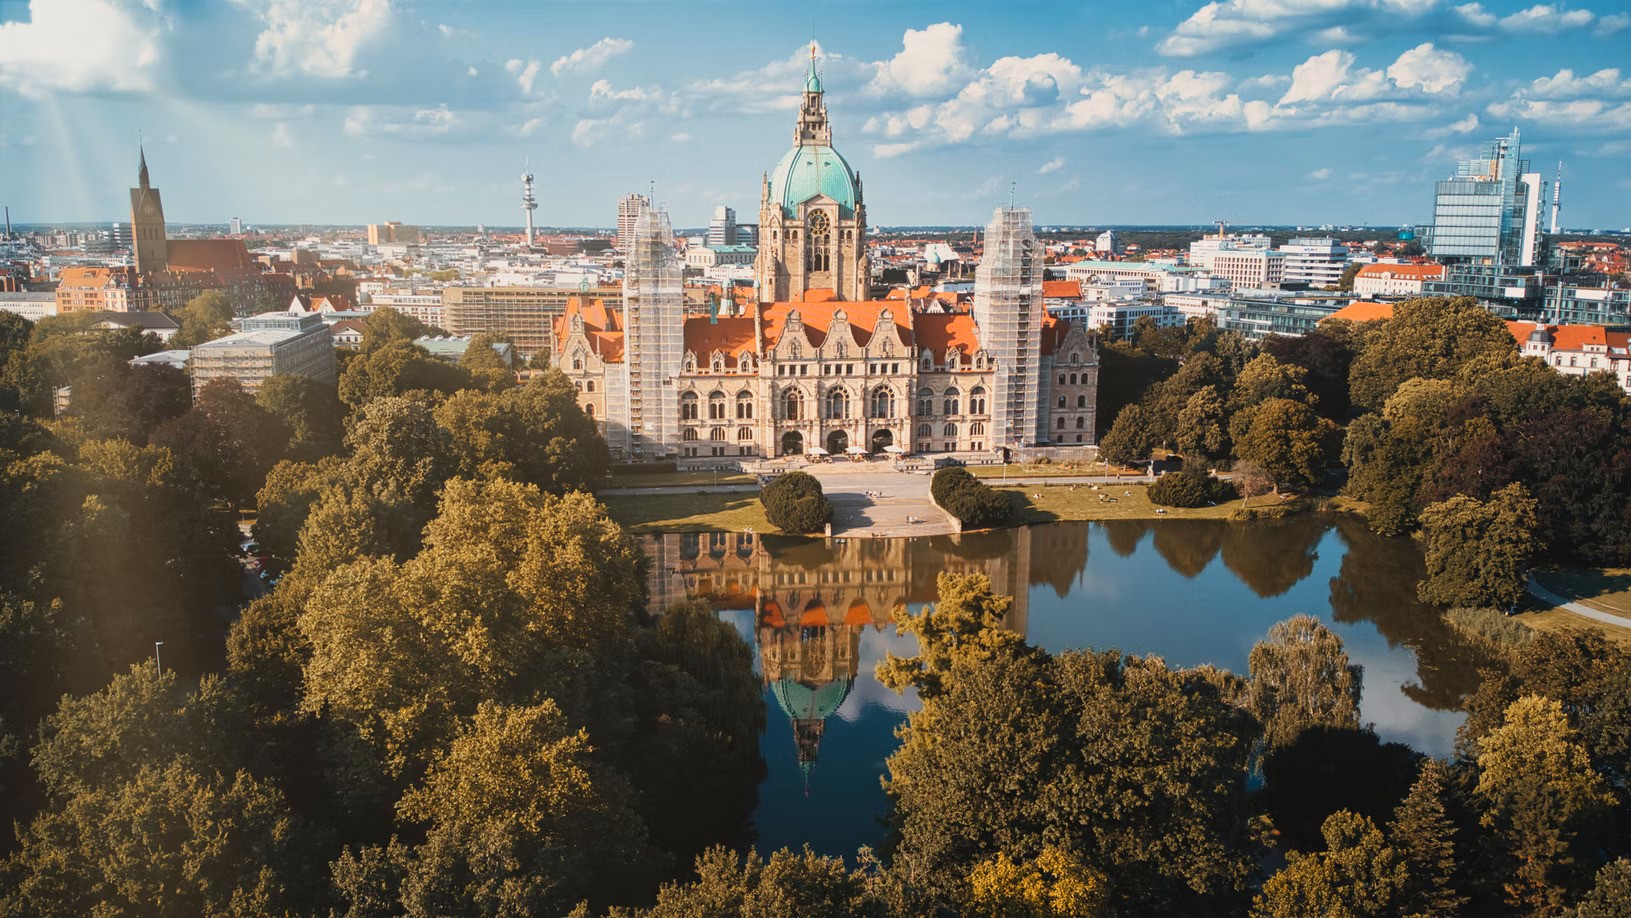 Hotels and accommodation in Hannover, Germany